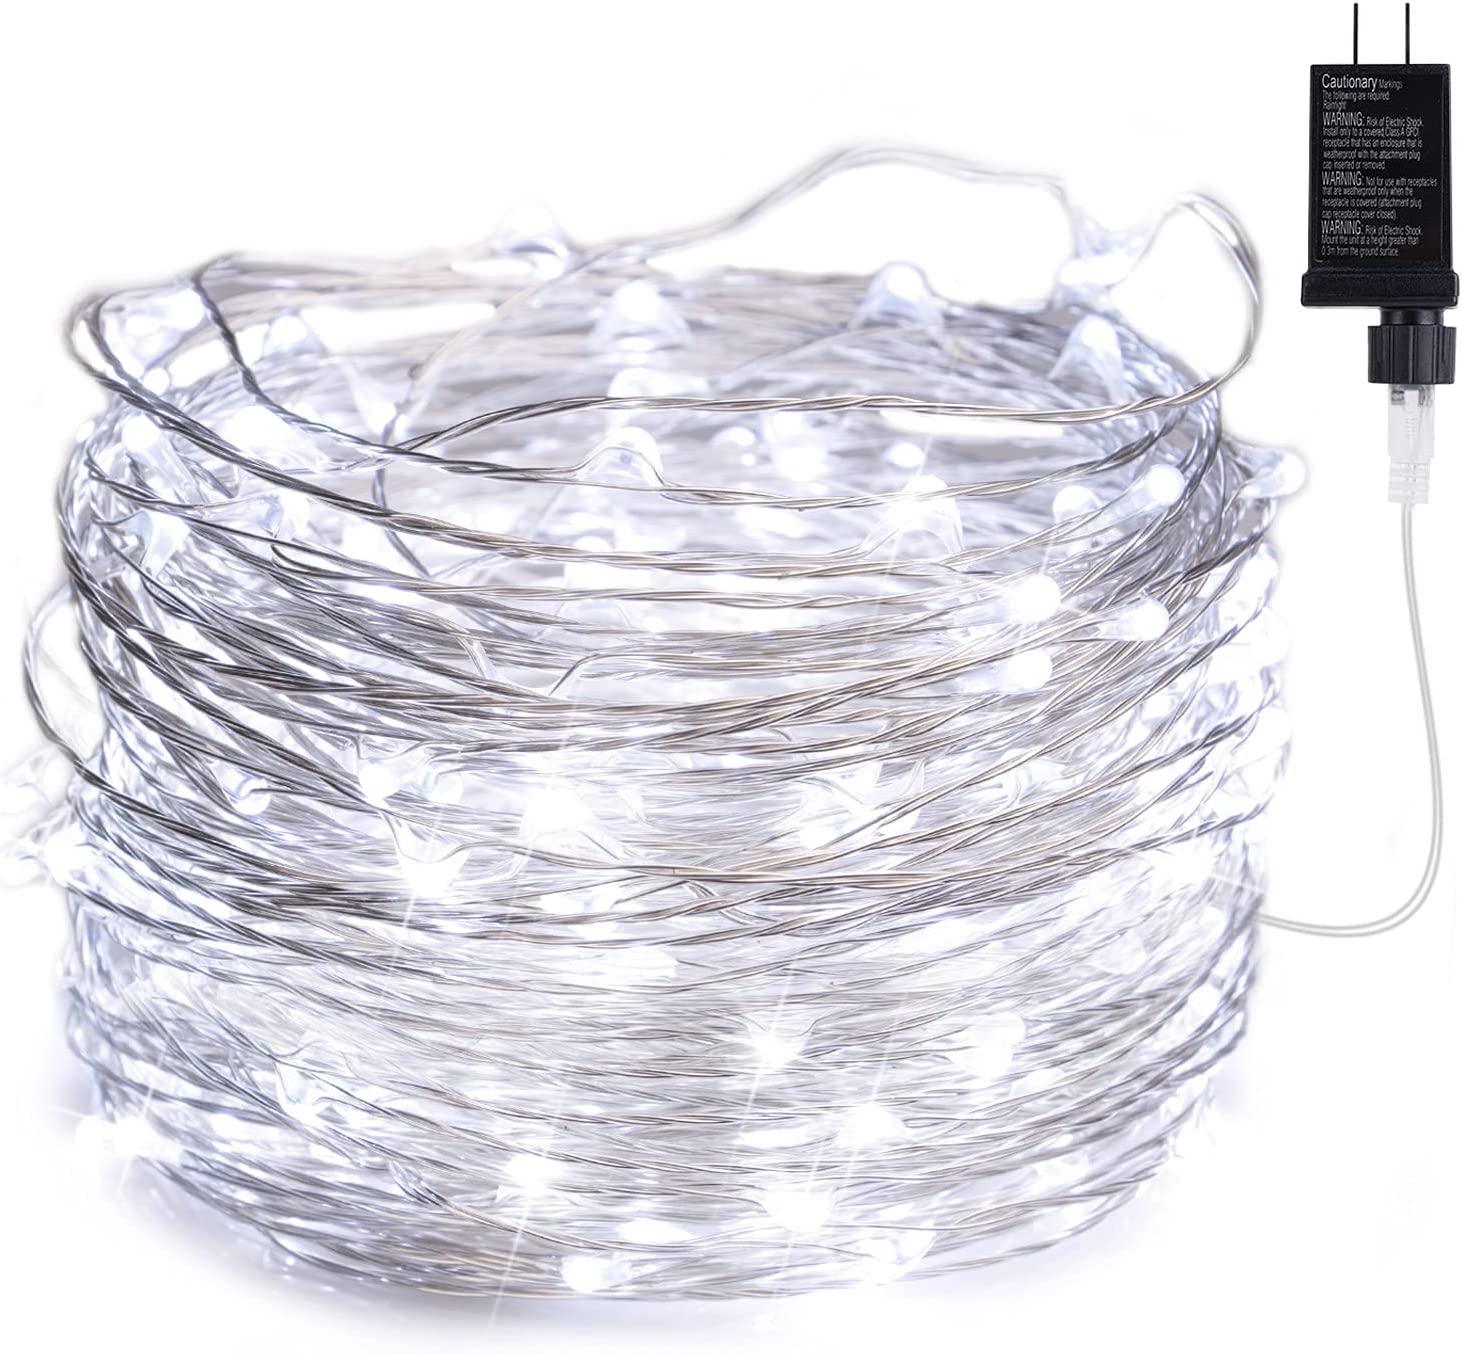 40Ft 120 LED Waterproof Copper Wire Firefly Lights,Starry String Lights for Wedding Indoor Outdoor Christmas Garden Decoration, Warm White(No Remote) - Lasercutwraps Shop